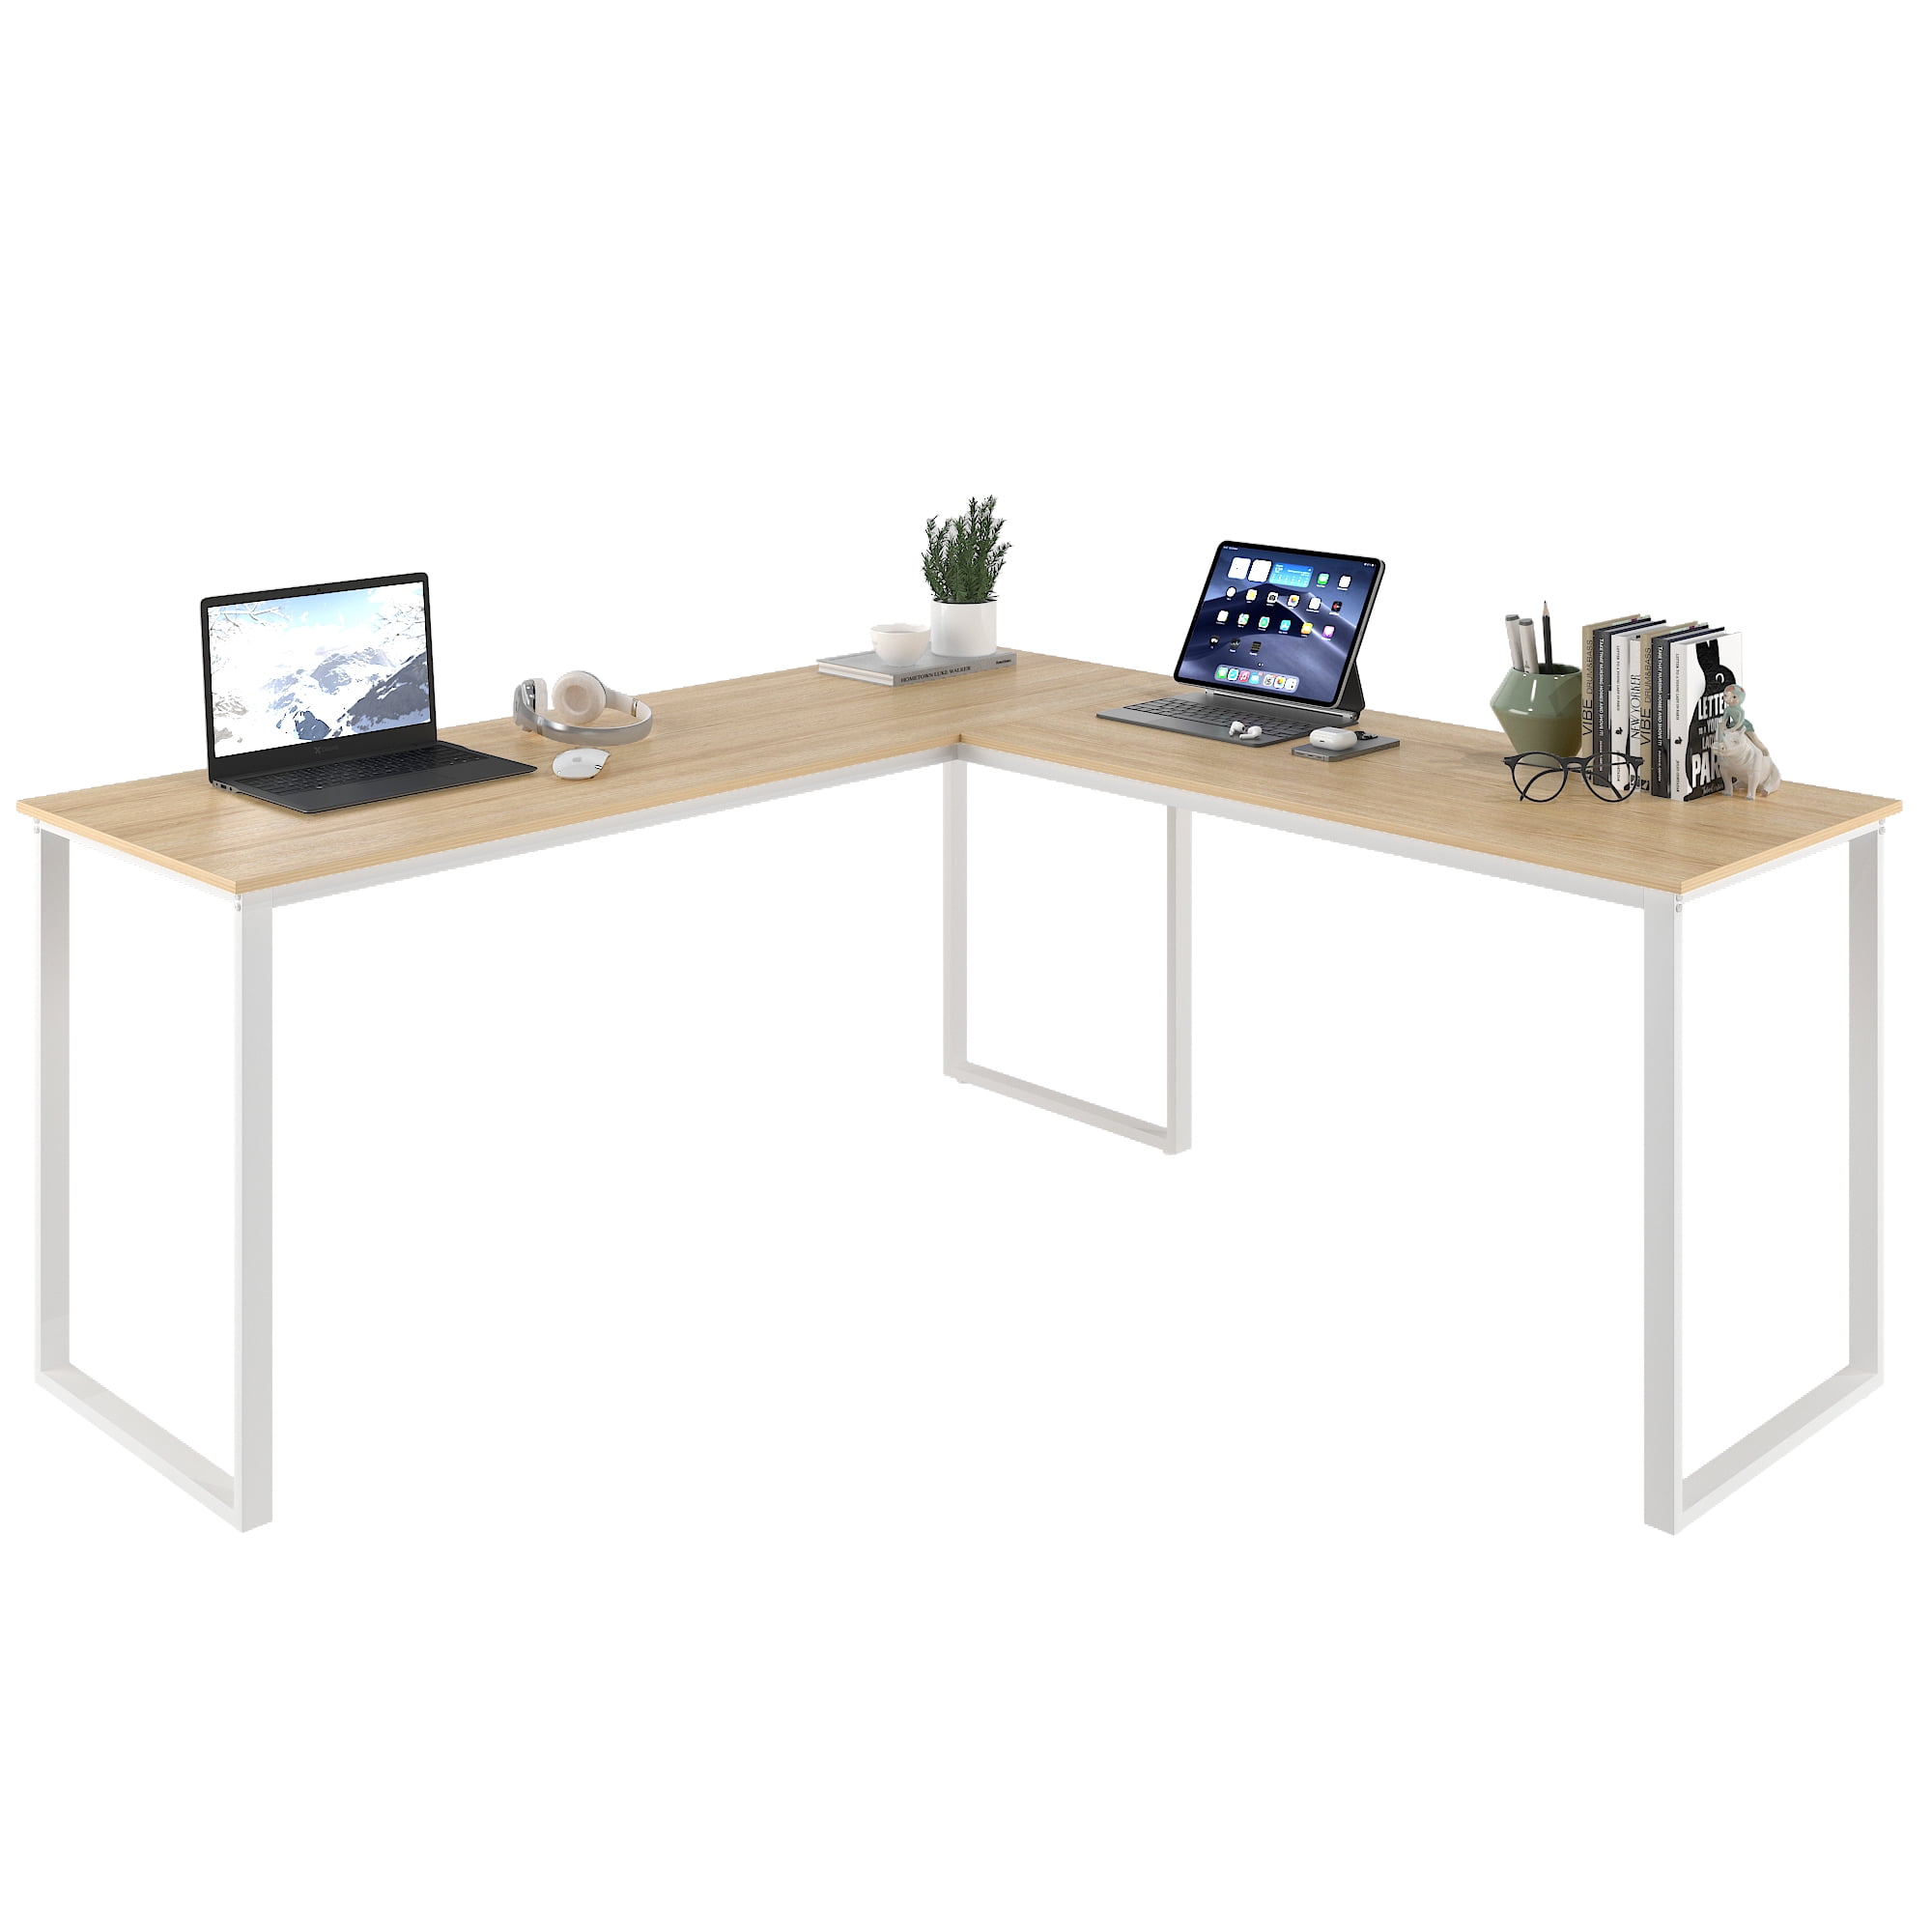 Home Office Computer Desk, Reversible Modern Writing Gaming Work Desk, L  Shaped Game Desk, Steel Frame and Thickened Desktop, 58L x 58W x 30H